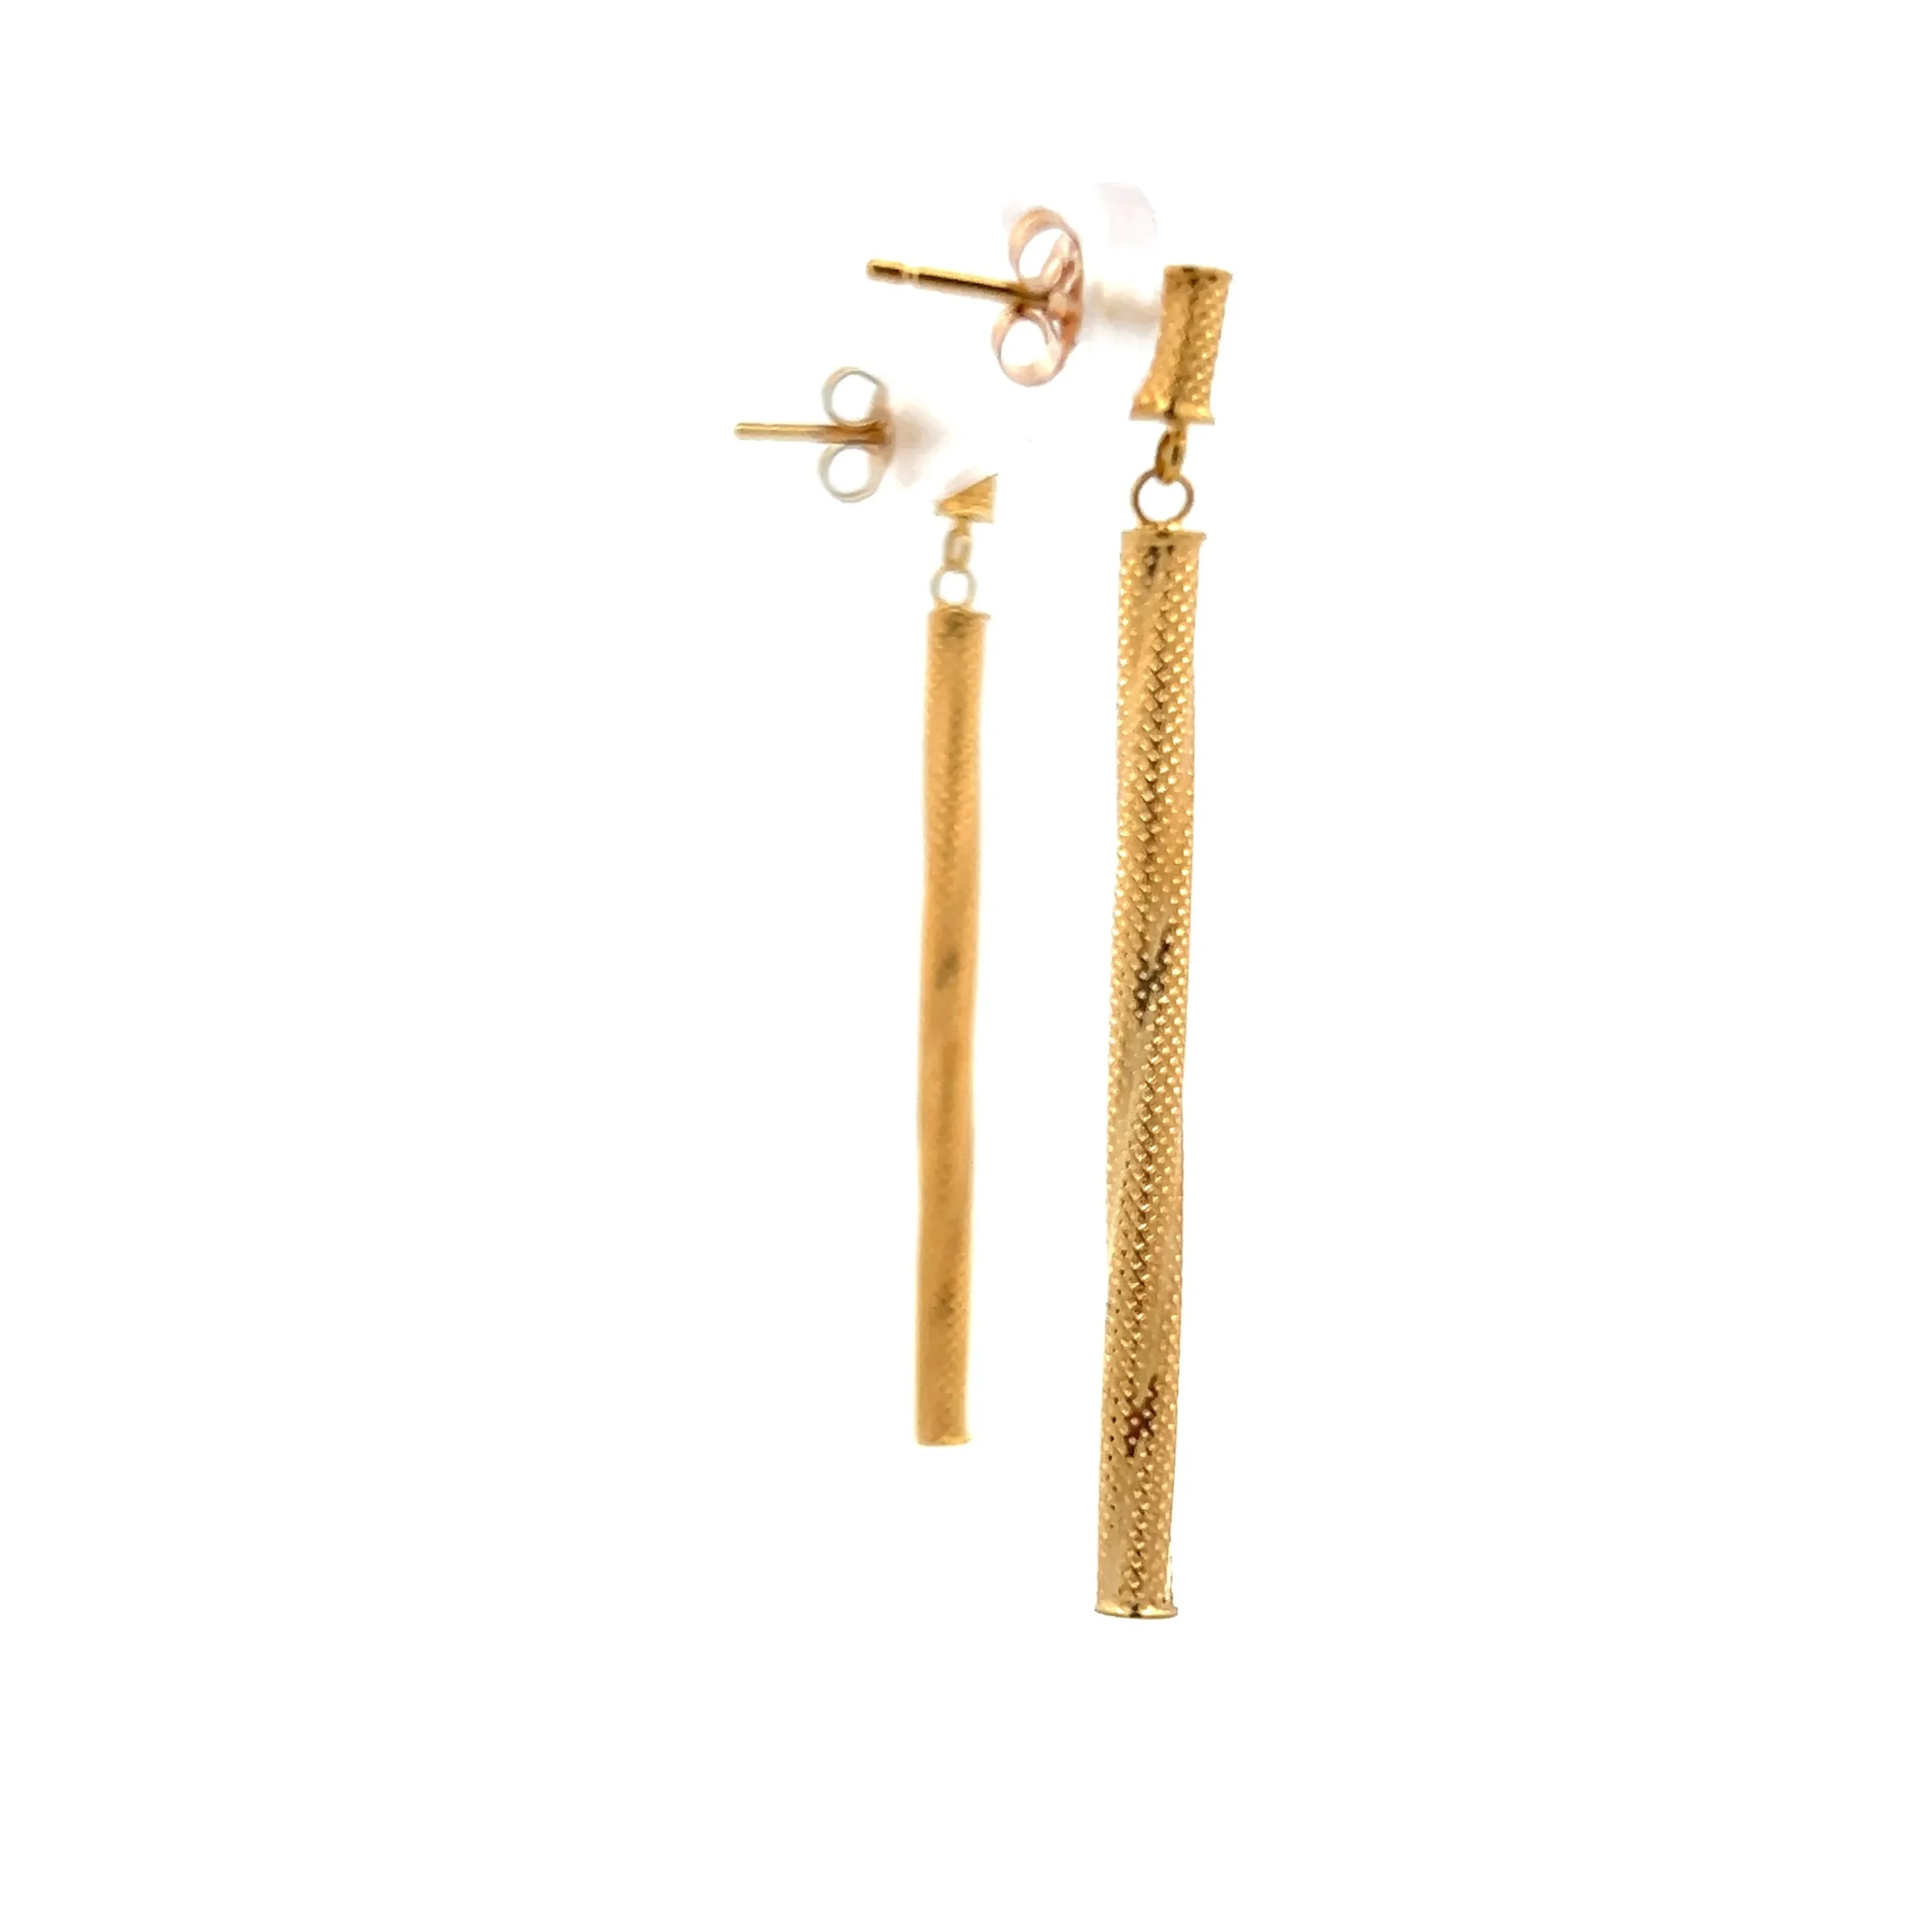 Estate Gold Bar Drop Earrings in 14K yellow gold with a notch texture pattern and elegant design.